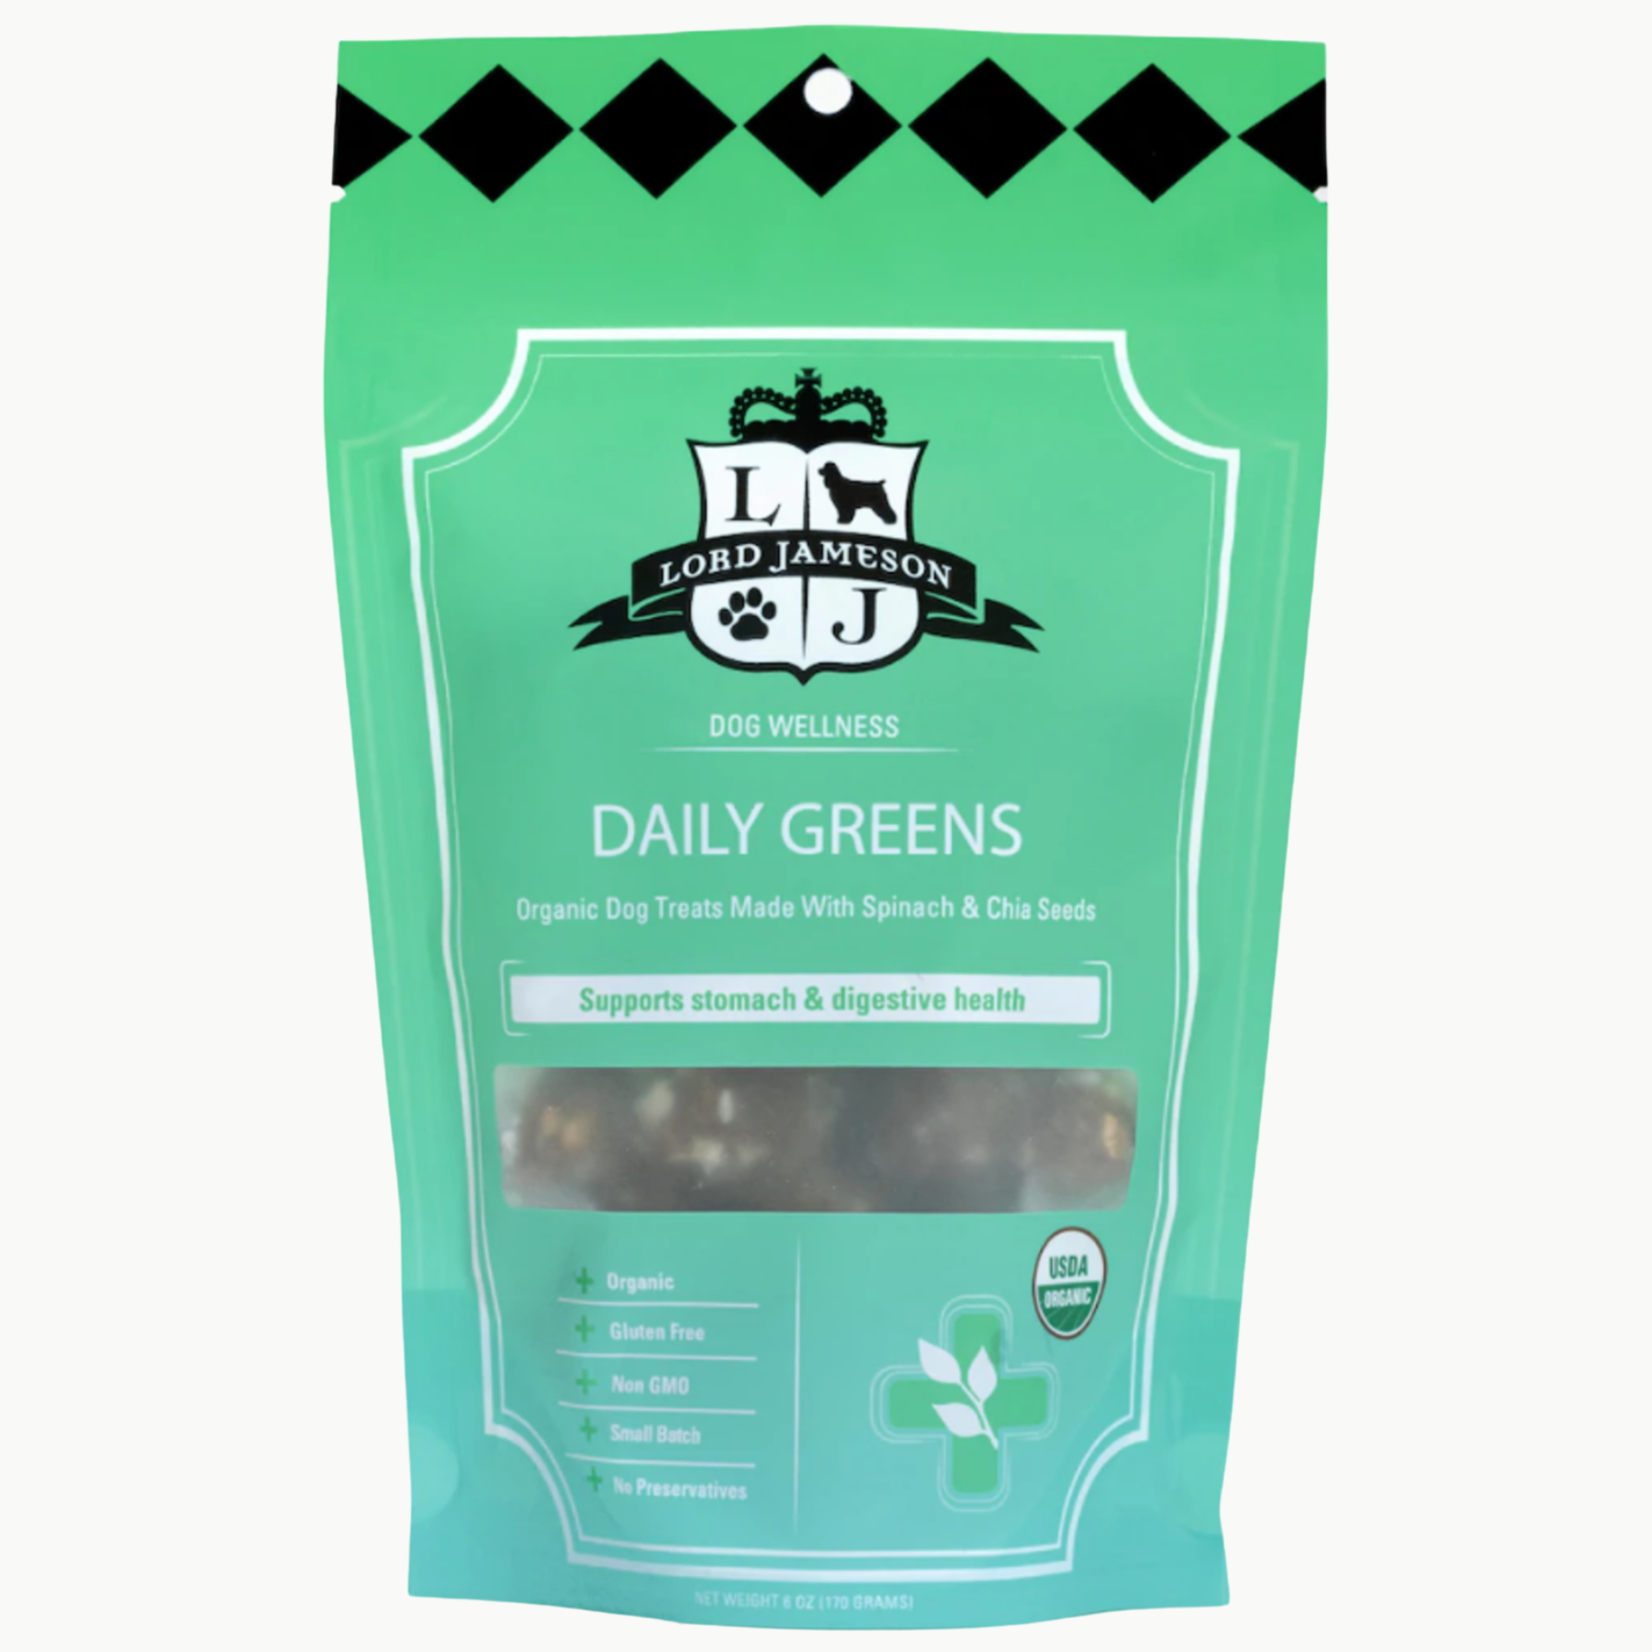 Lord Jameson Organic Spinach & Chia Seeds dog treats/meal mixer